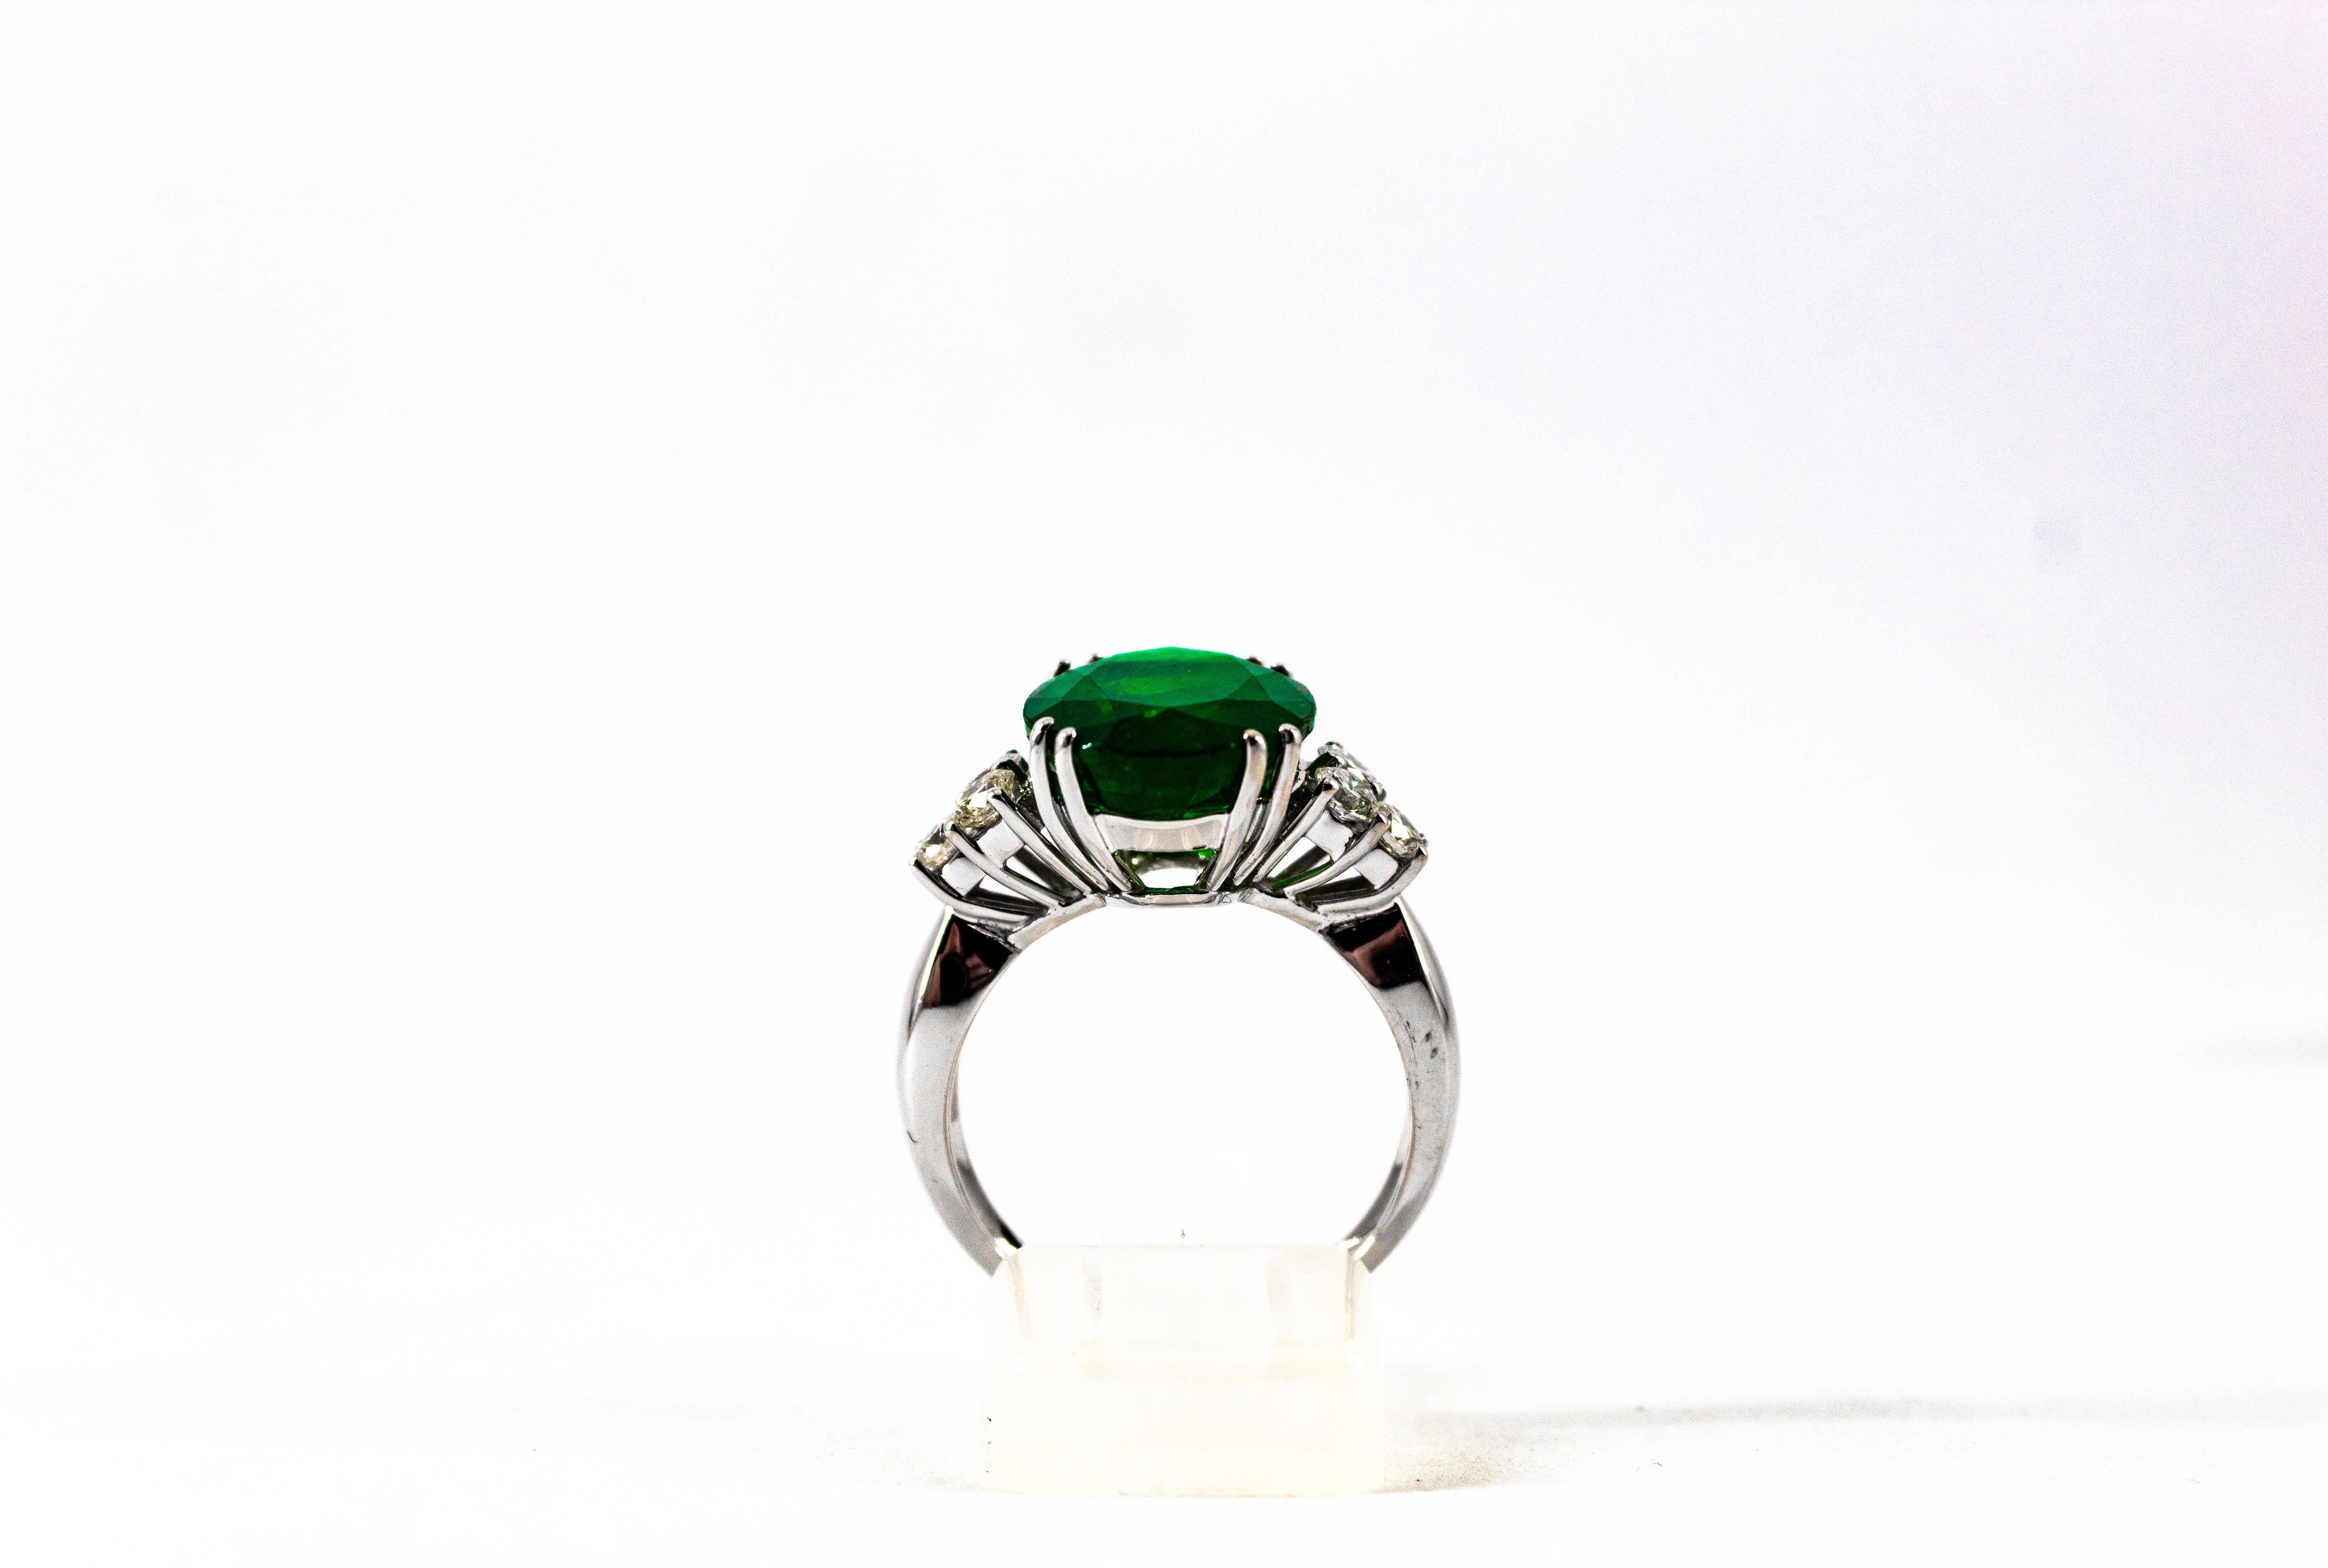 This Ring is made of 18K White Gold.
This Ring has 0.60 Carats of White Modern Round Cut Diamonds. Color: H-G Clarity: VVS1
This Ring has a 6.42 Carats Natural Zambia Oval Cut Emerald.
Size ITA: 15 USA: 7
We're a workshop so every piece is handmade,